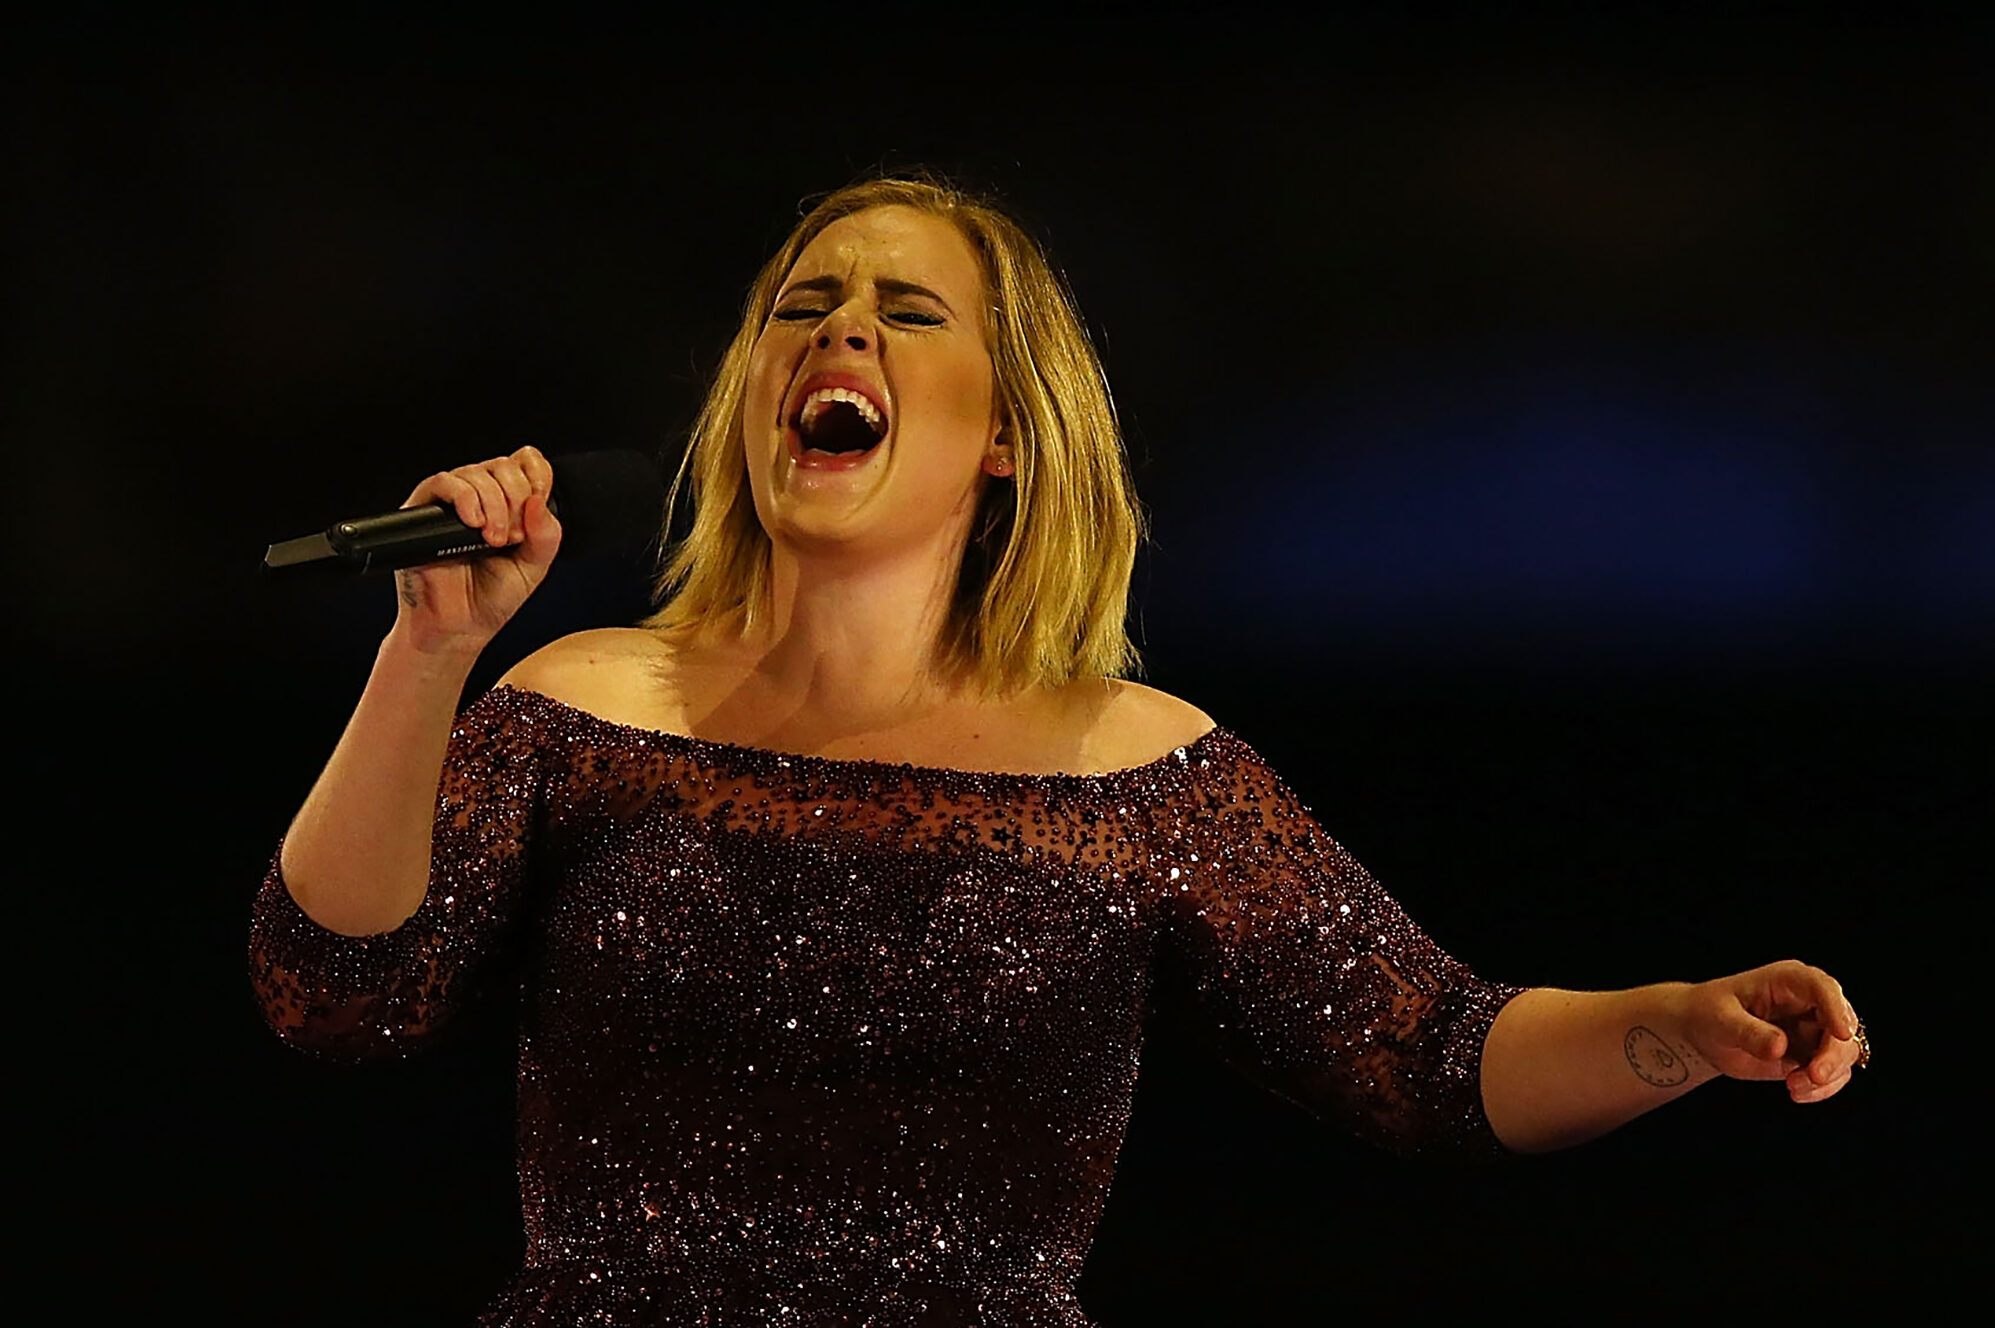 Adele announces new single "Easy On Me", coming 15 October